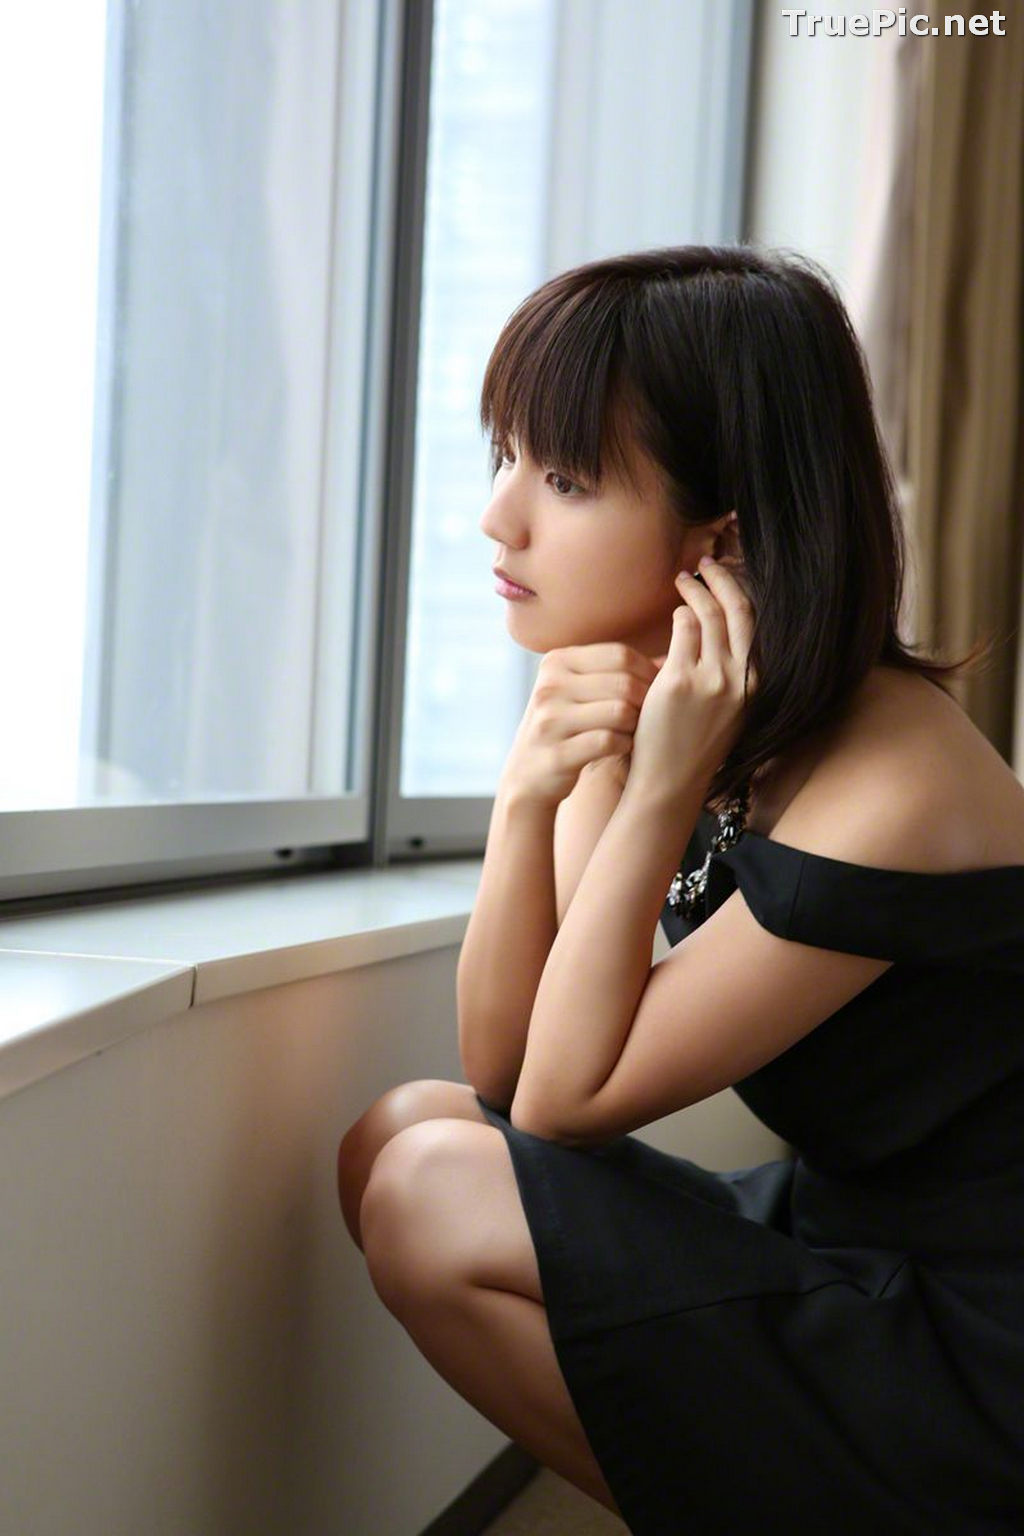 Image [WBGC Photograph] No.131 - Japanese Singer and Actress - Erina Mano - TruePic.net - Picture-142